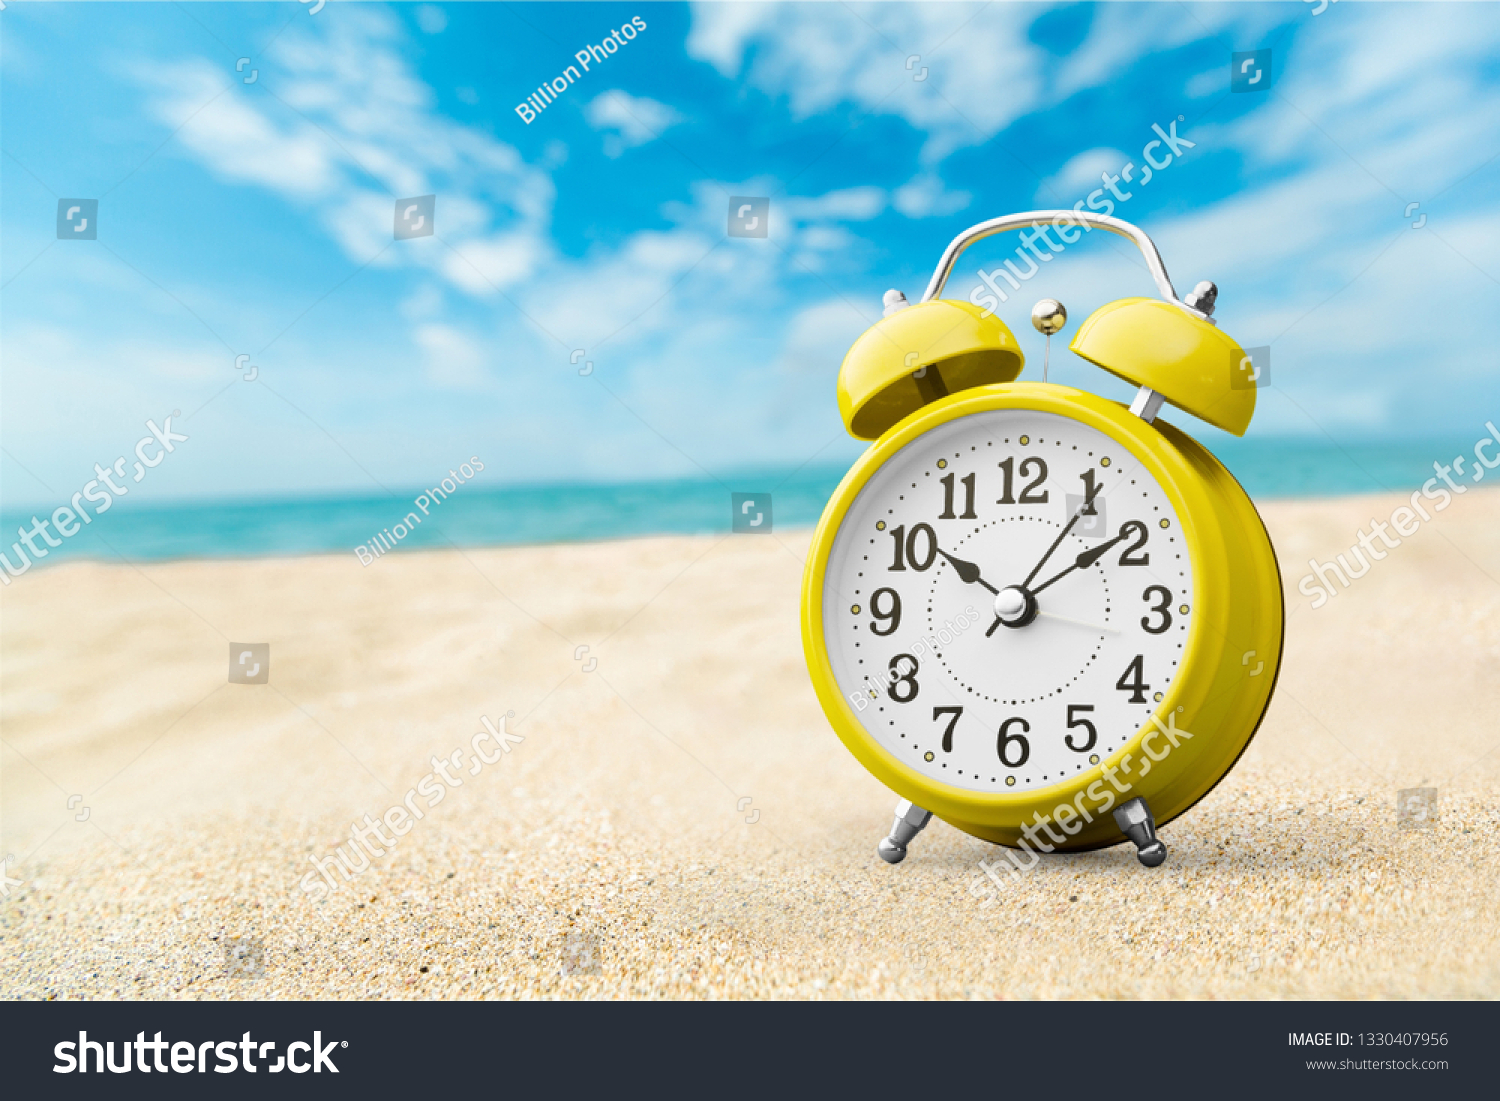 Last Minute - Summertime Concept - Alarm In Tropical Beach #1330407956